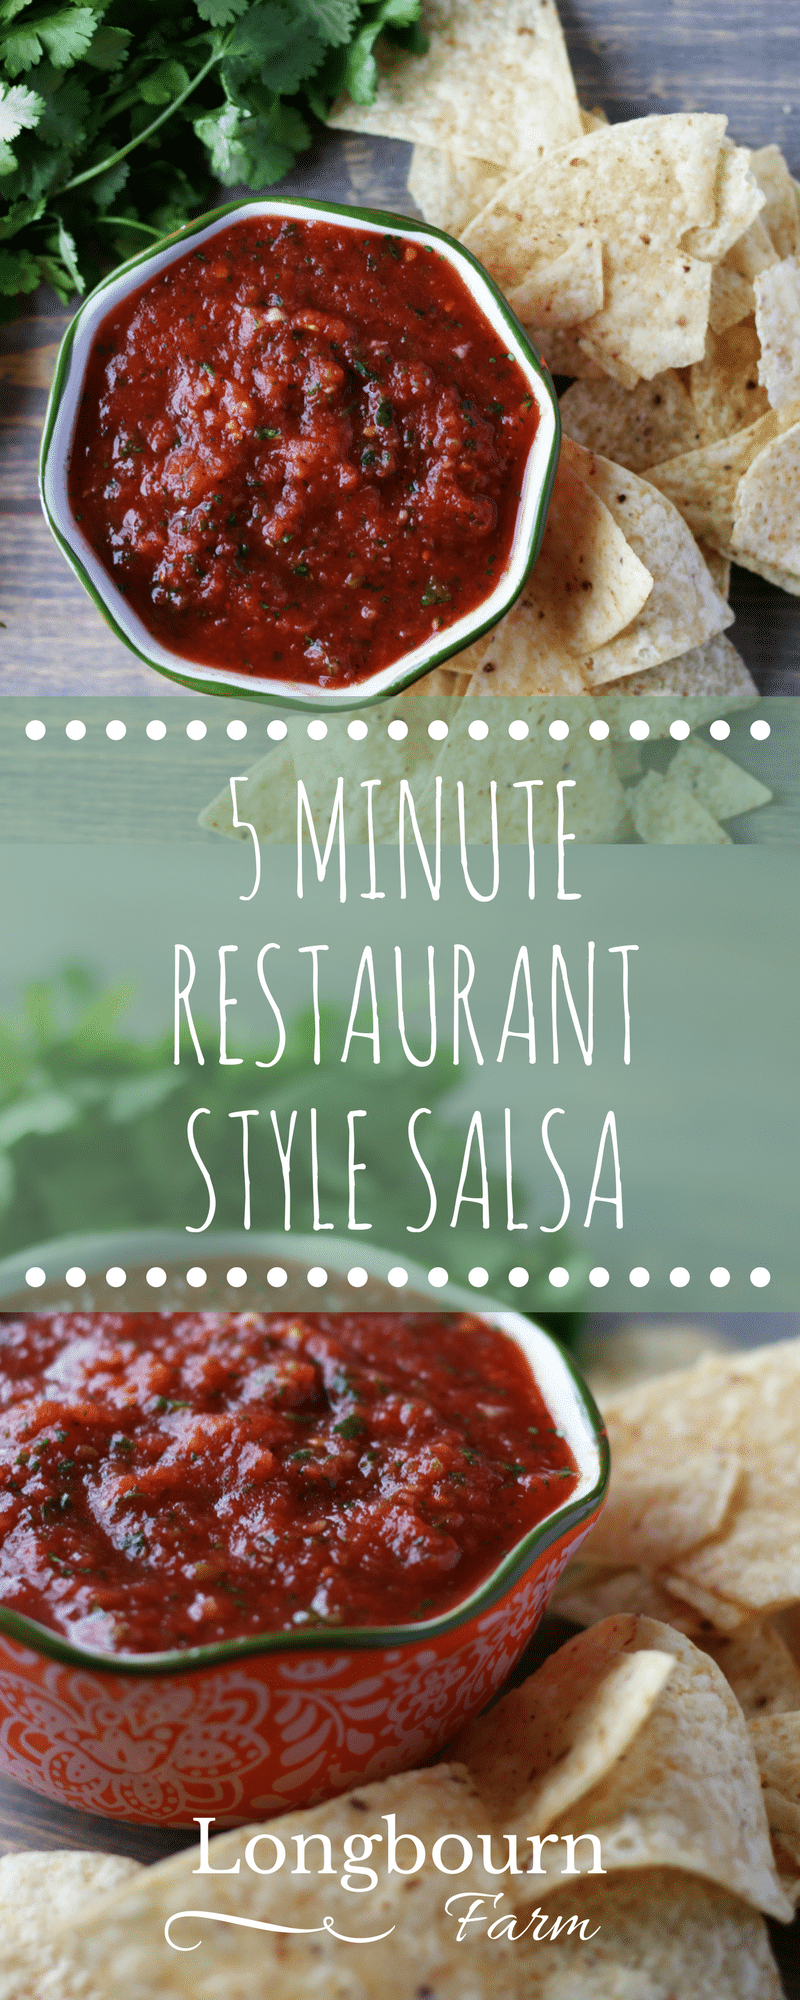 This Restaurant Style Salsa is insanely delicious and only takes minutes to make. Thick and bursting with flavor it's everything a salsa should be.